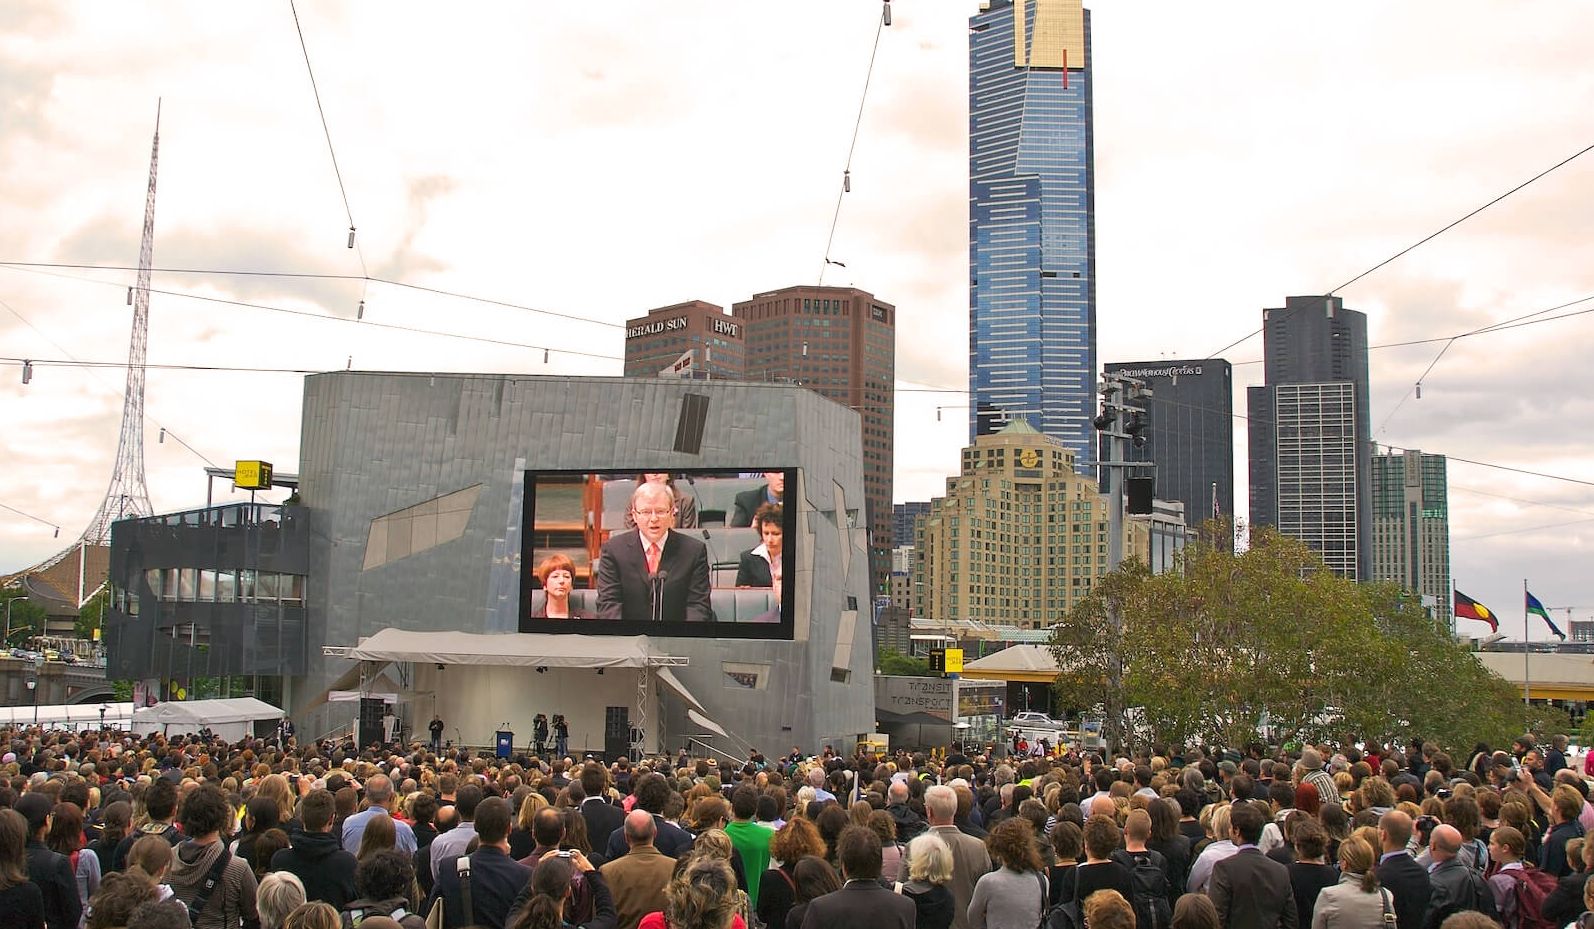 Big screen broadcast at Federation Square of Kevin Rudd's national apology